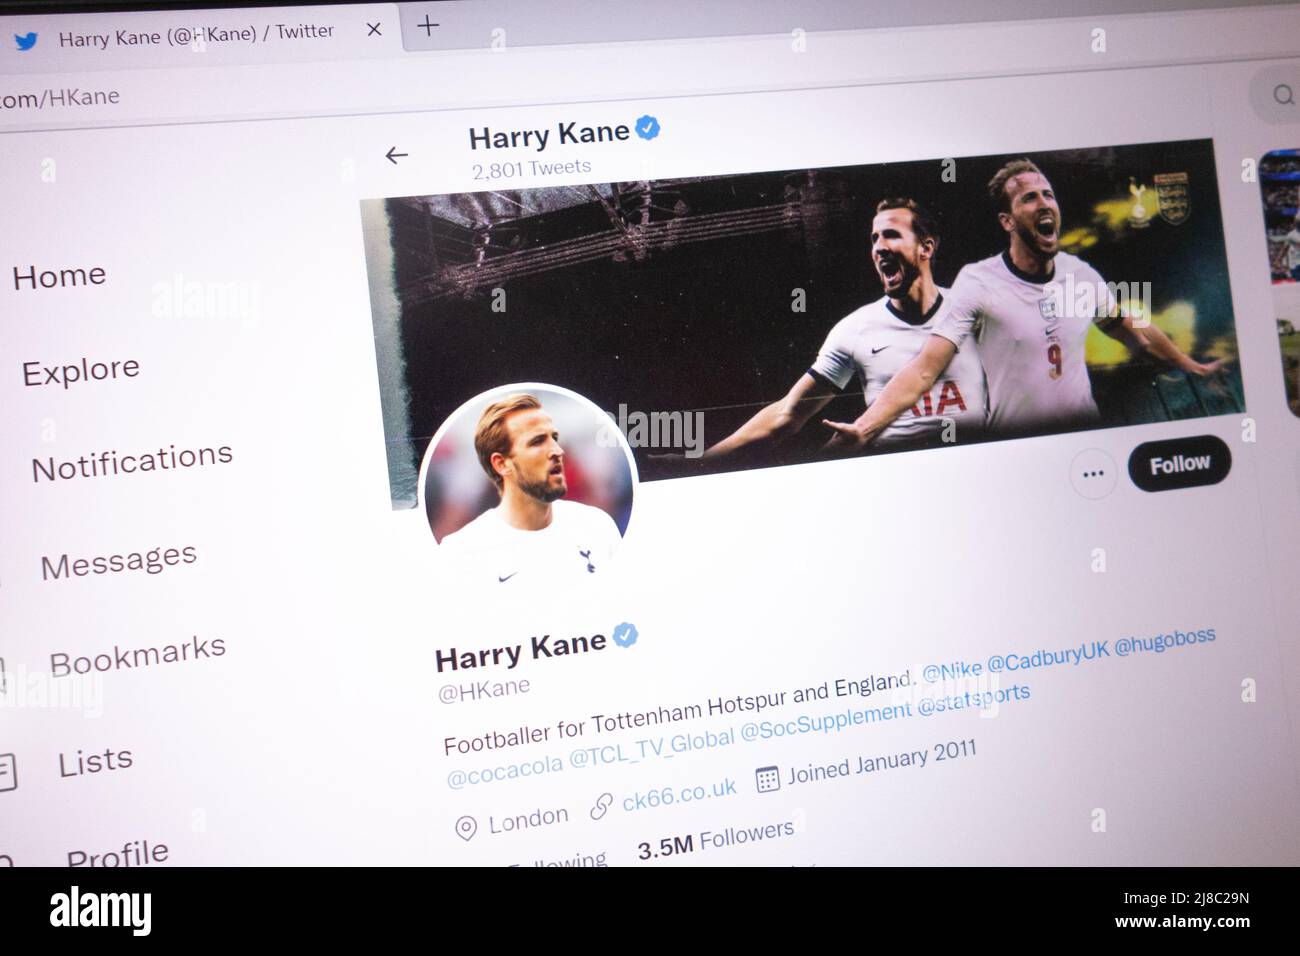 KONSKIE, POLAND - May 14, 2022: Harry Kane official Twitter account displayed on laptop screen Stock Photo